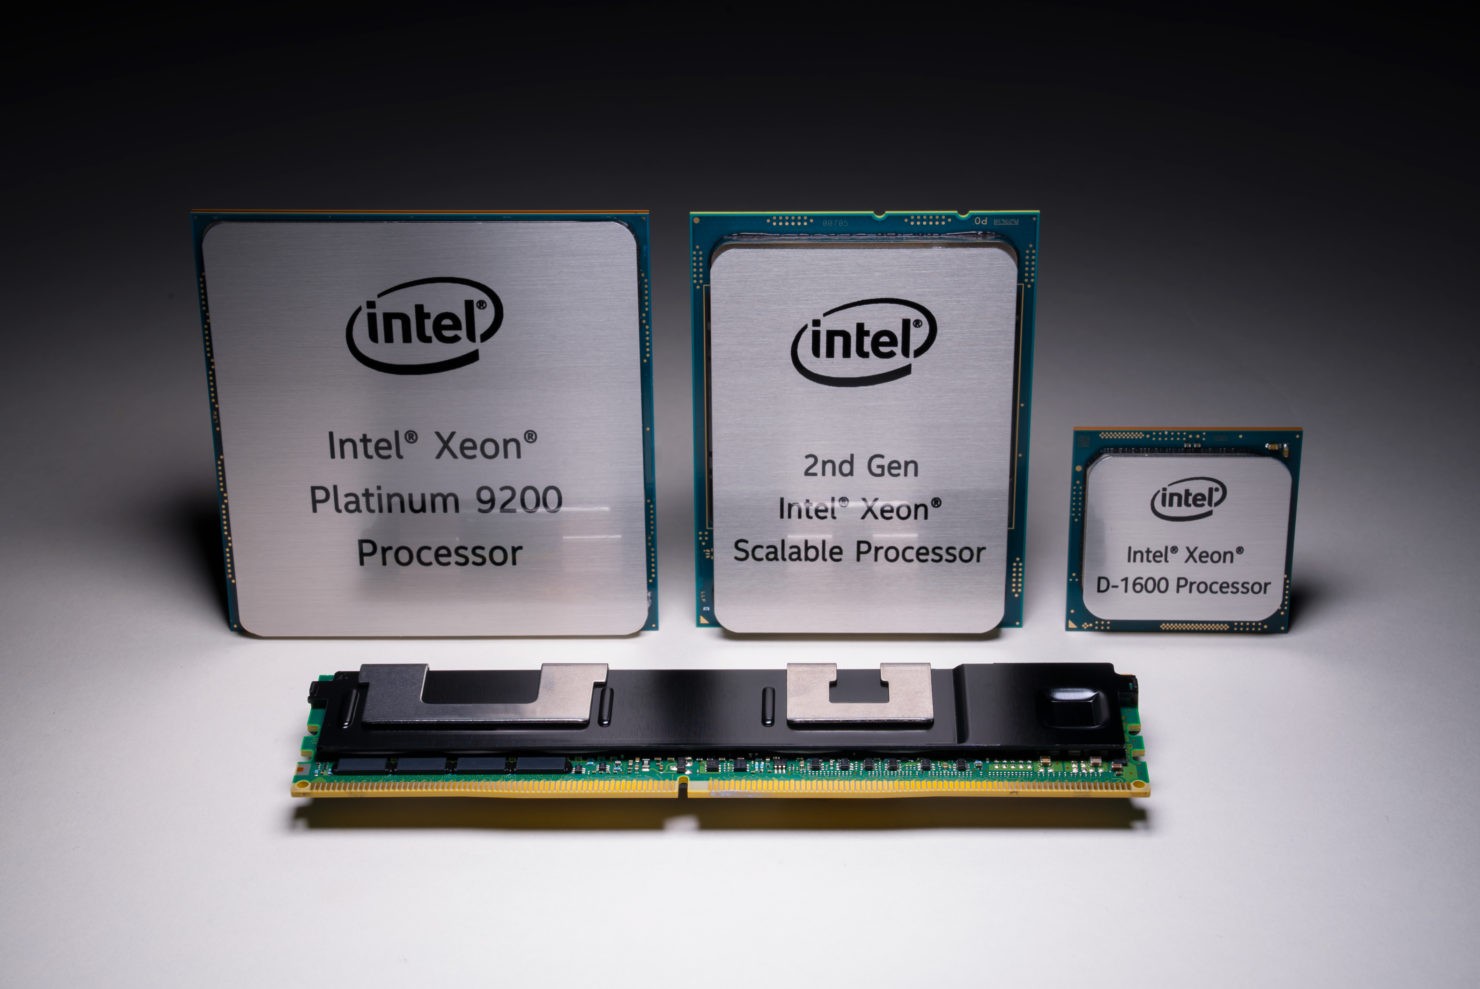 The Intel Xeon Family (from left): Intel Xeon Platinum 9200 processor, 2nd-Gen Intel Xeon Scalable Processor and Intel® Xeon® D-1600 Processor. Intel Corporation on April 2, 2019, introduced a portfolio of data-centric tools to help its customers extract more value from their data. (Credit: Tim Herman/Intel Corporation)
